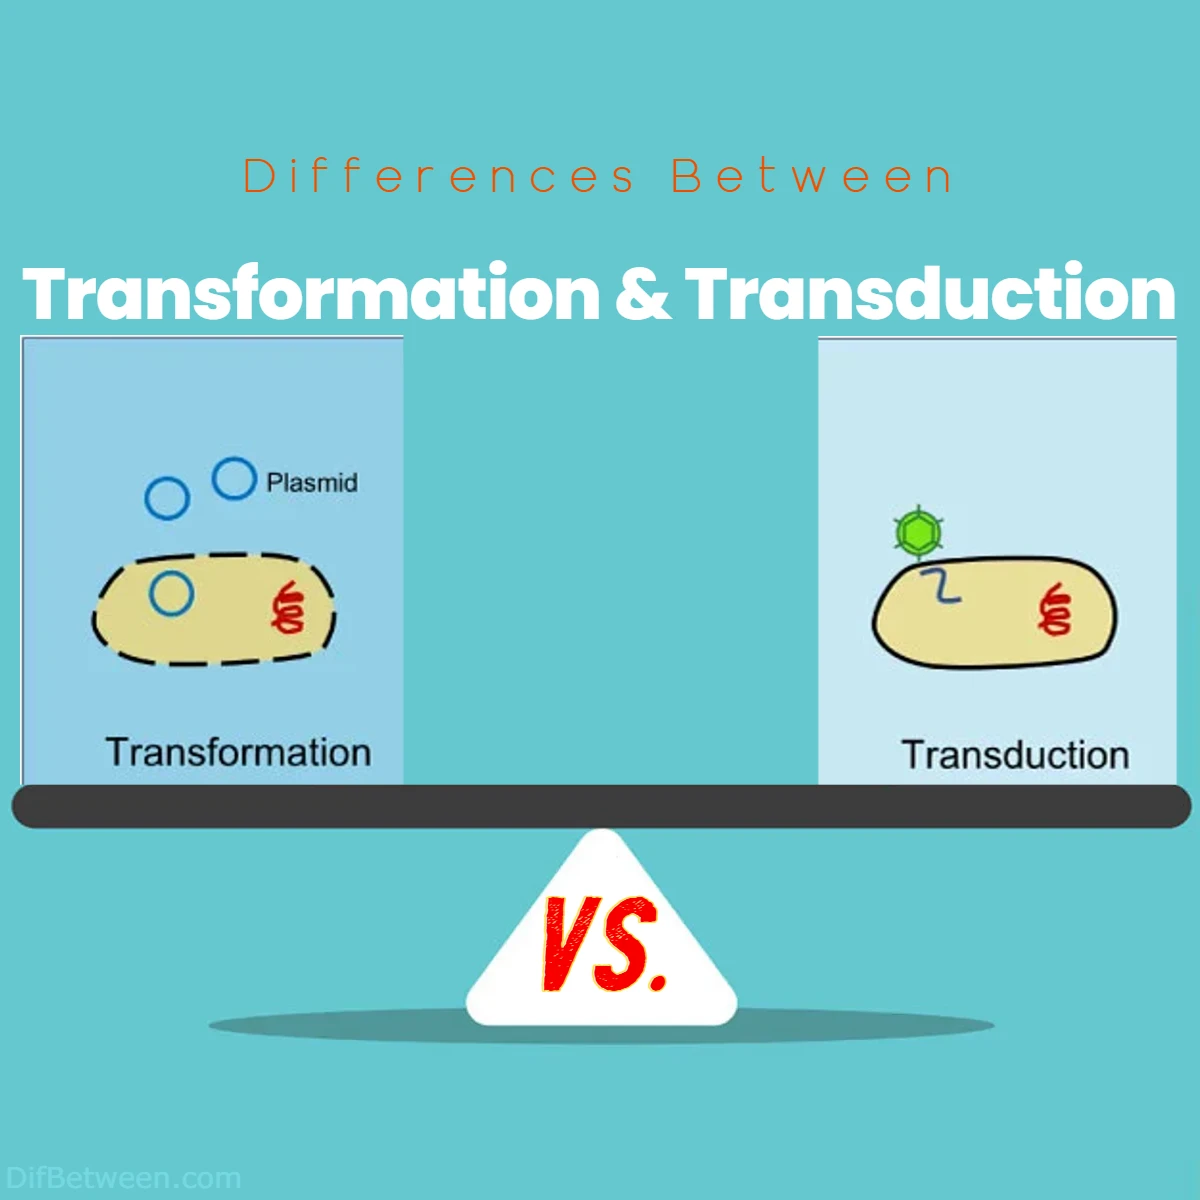 Difference Between Transformation and Transduction